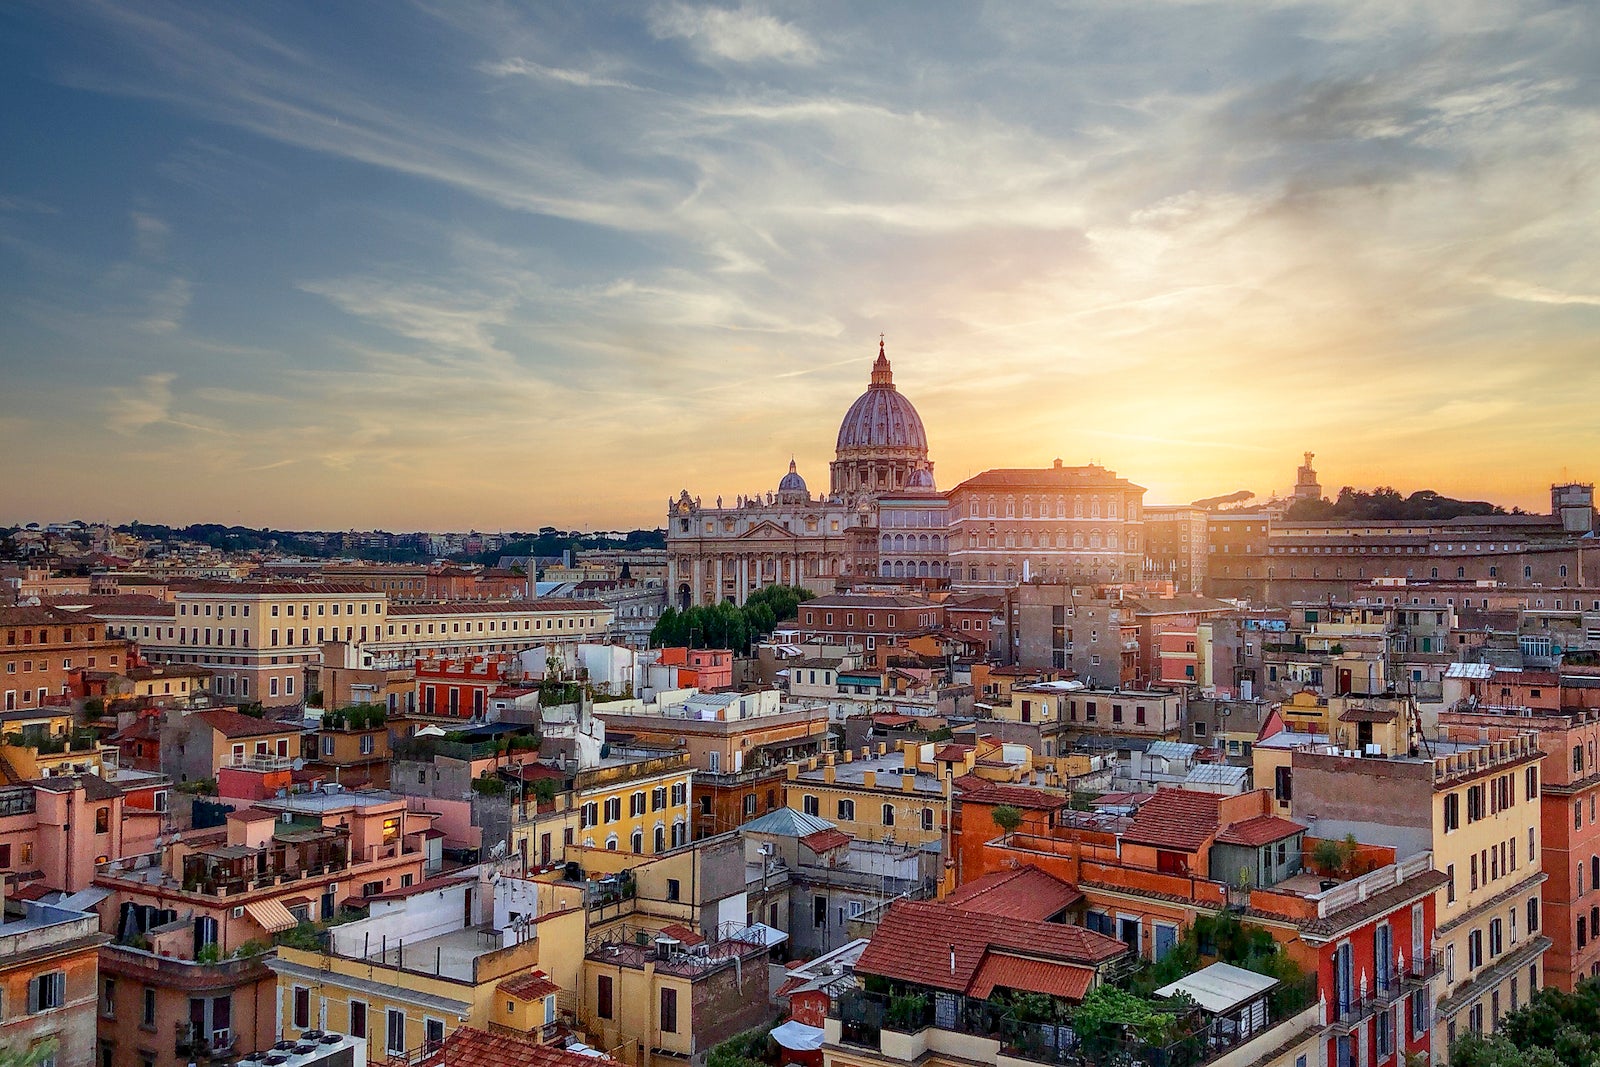 Save up to $1,000 on business-class flights to Italy GettyImages 1315647215